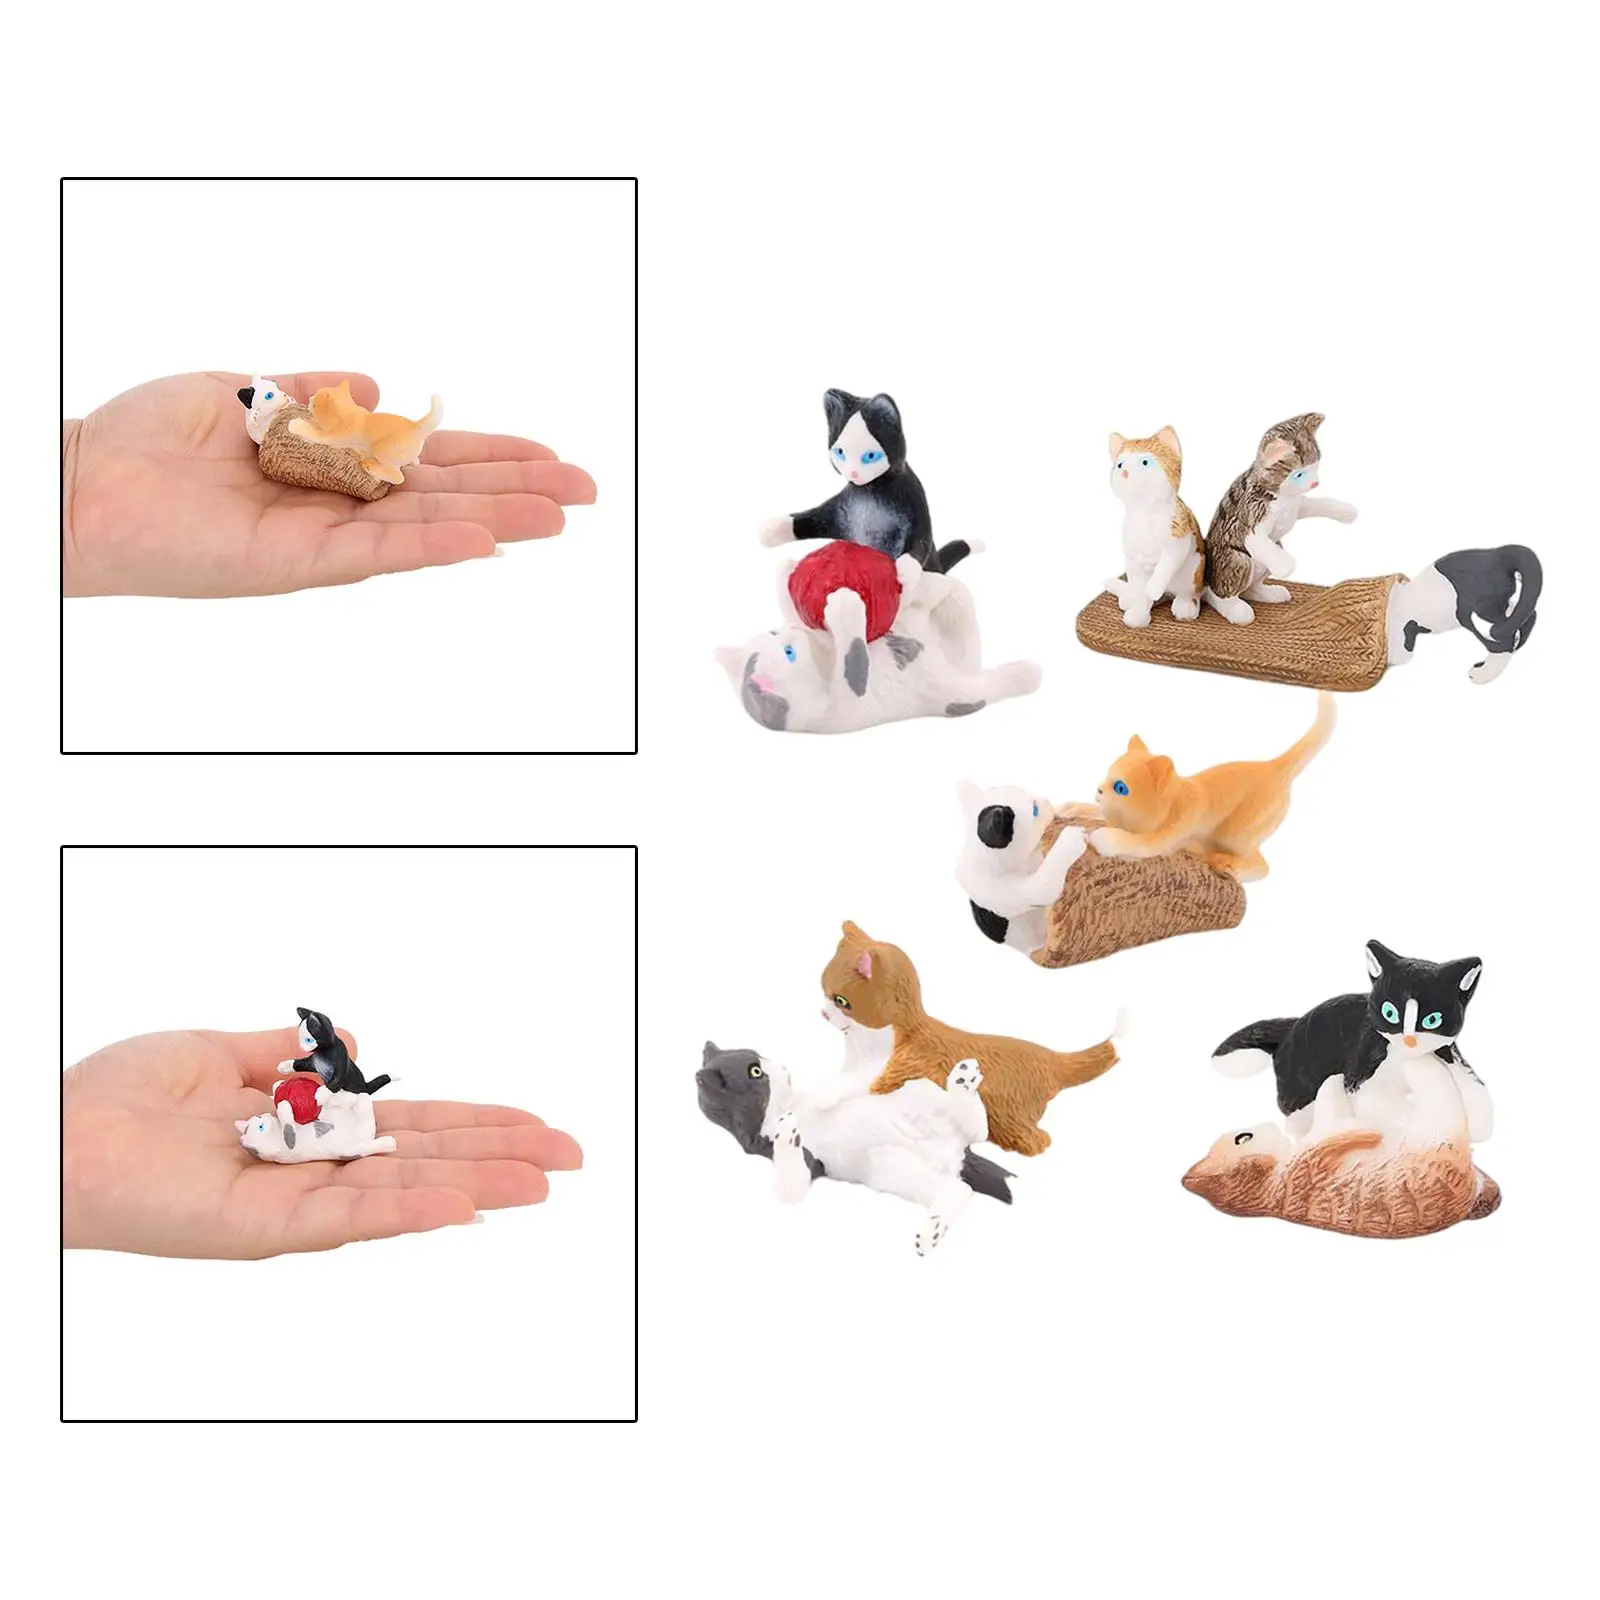 5 Pieces Simulation Cat Figures Home Decor Statues Playset for Boys and Girls Birthday Gift